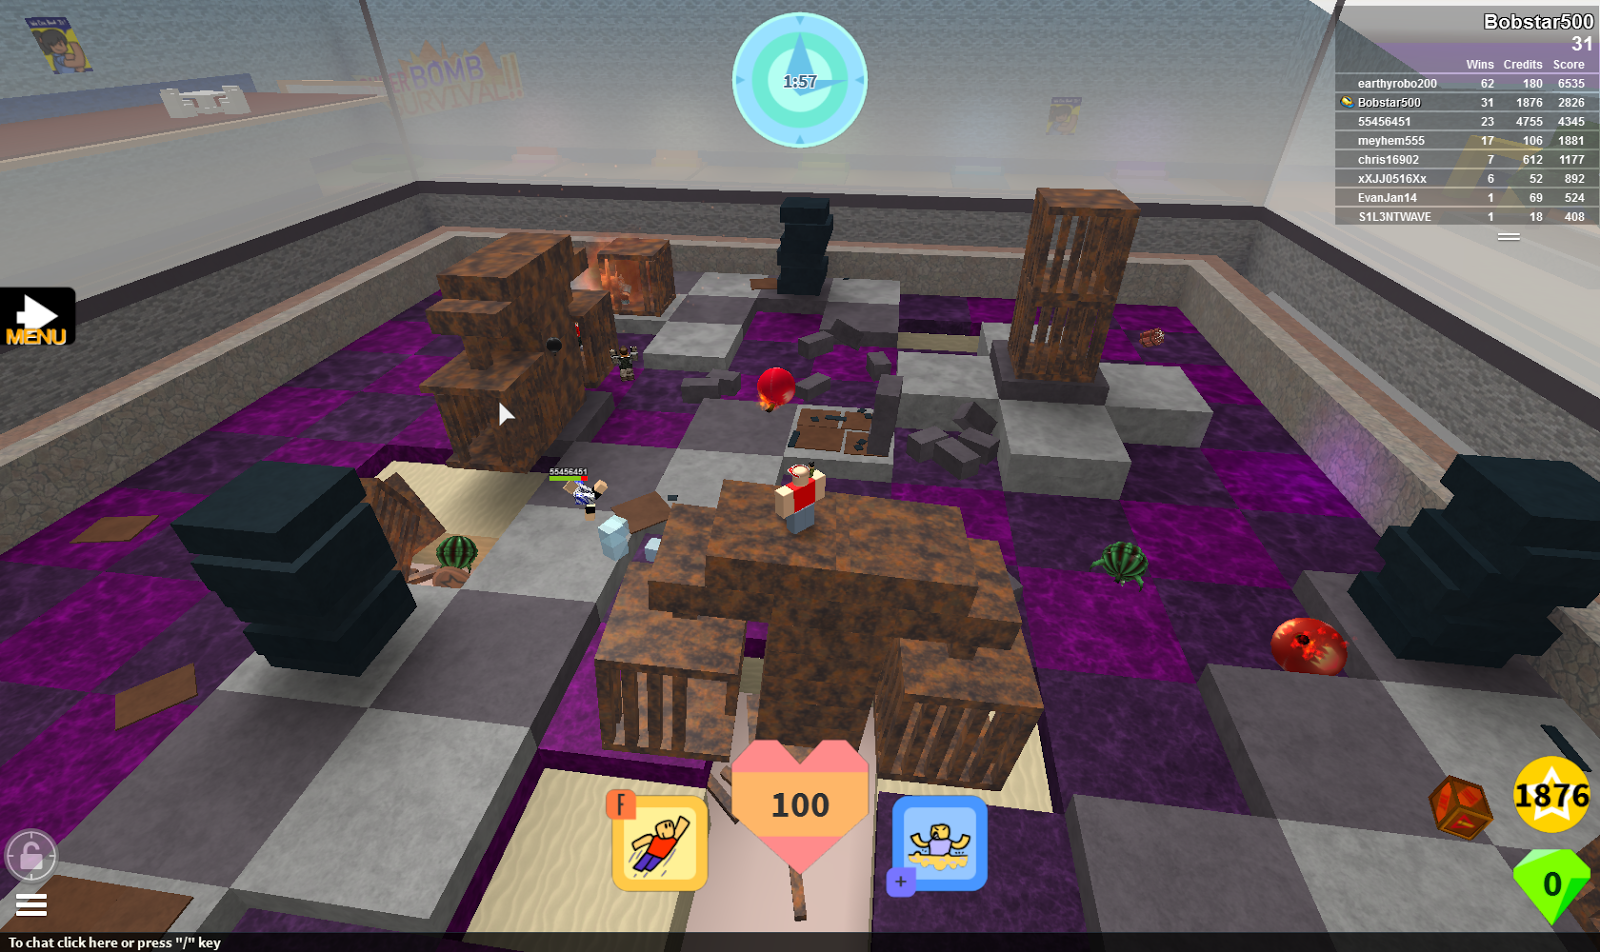 Unofficial Roblox Roblox Games Best Of 2014 - 7 best roblox images games roblox the floor is lava